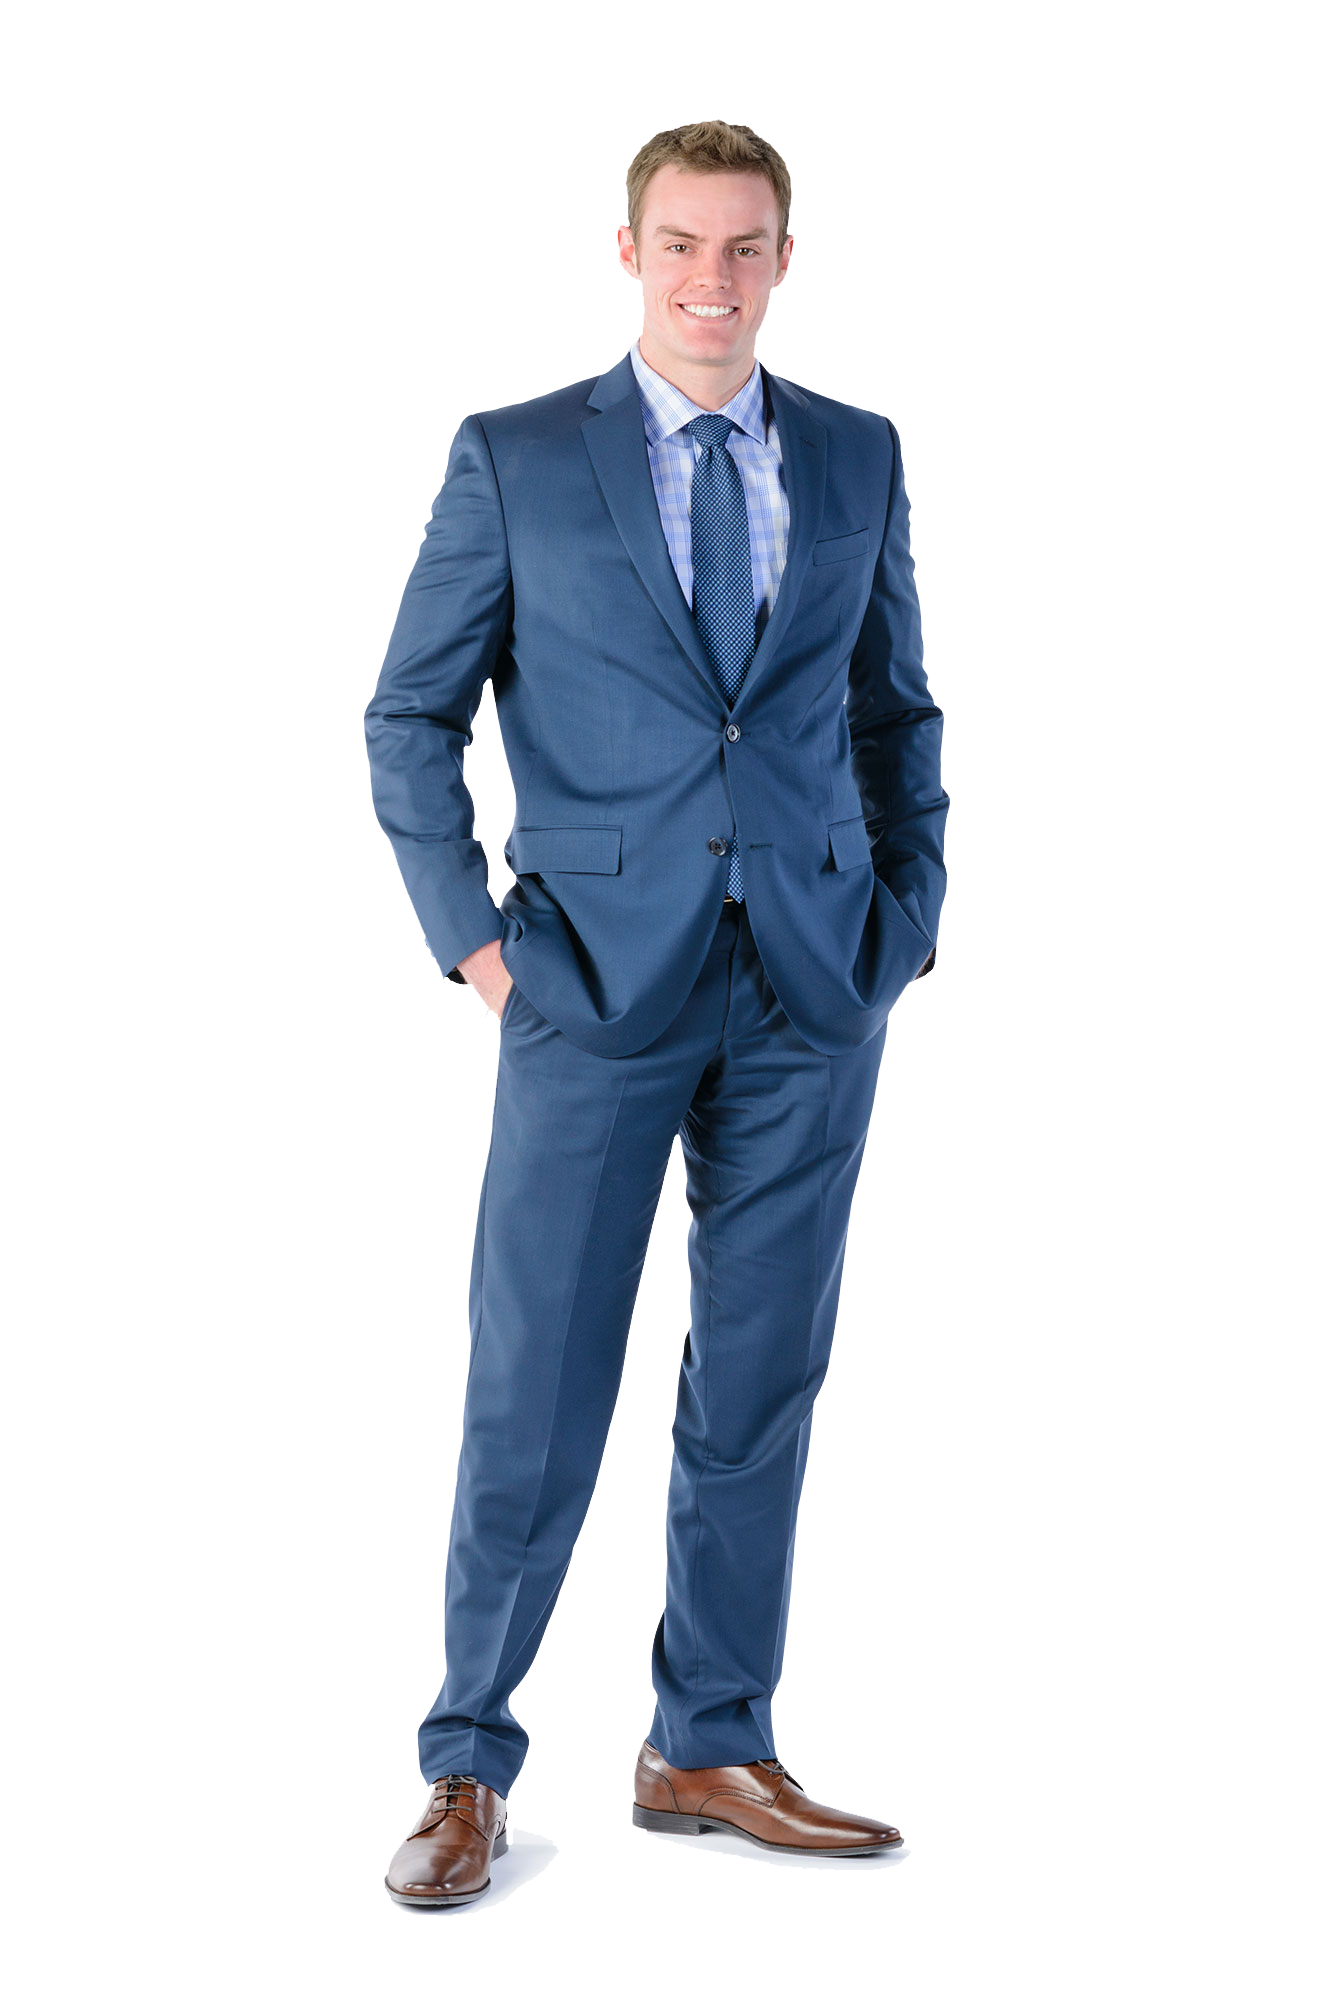 Suit business man standing PNG Image